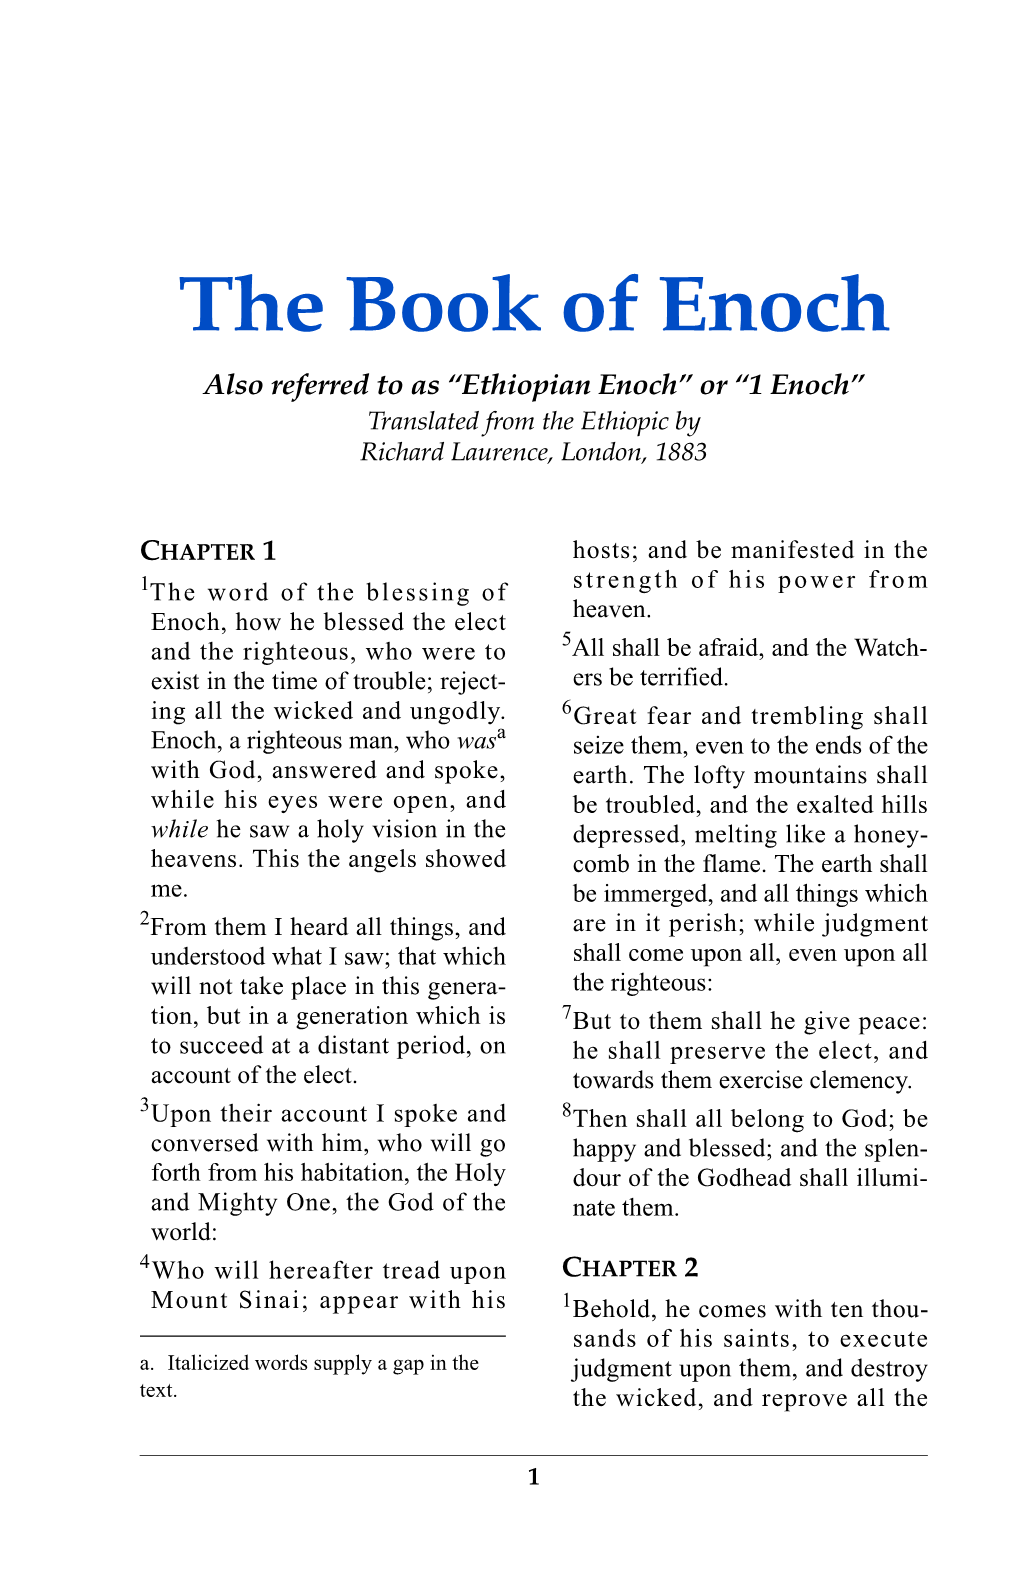 The Book of Enoch Also Referred to As “Ethiopian Enoch” Or “1 Enoch” Translated from the Ethiopic by Richard Laurence, London, 1883